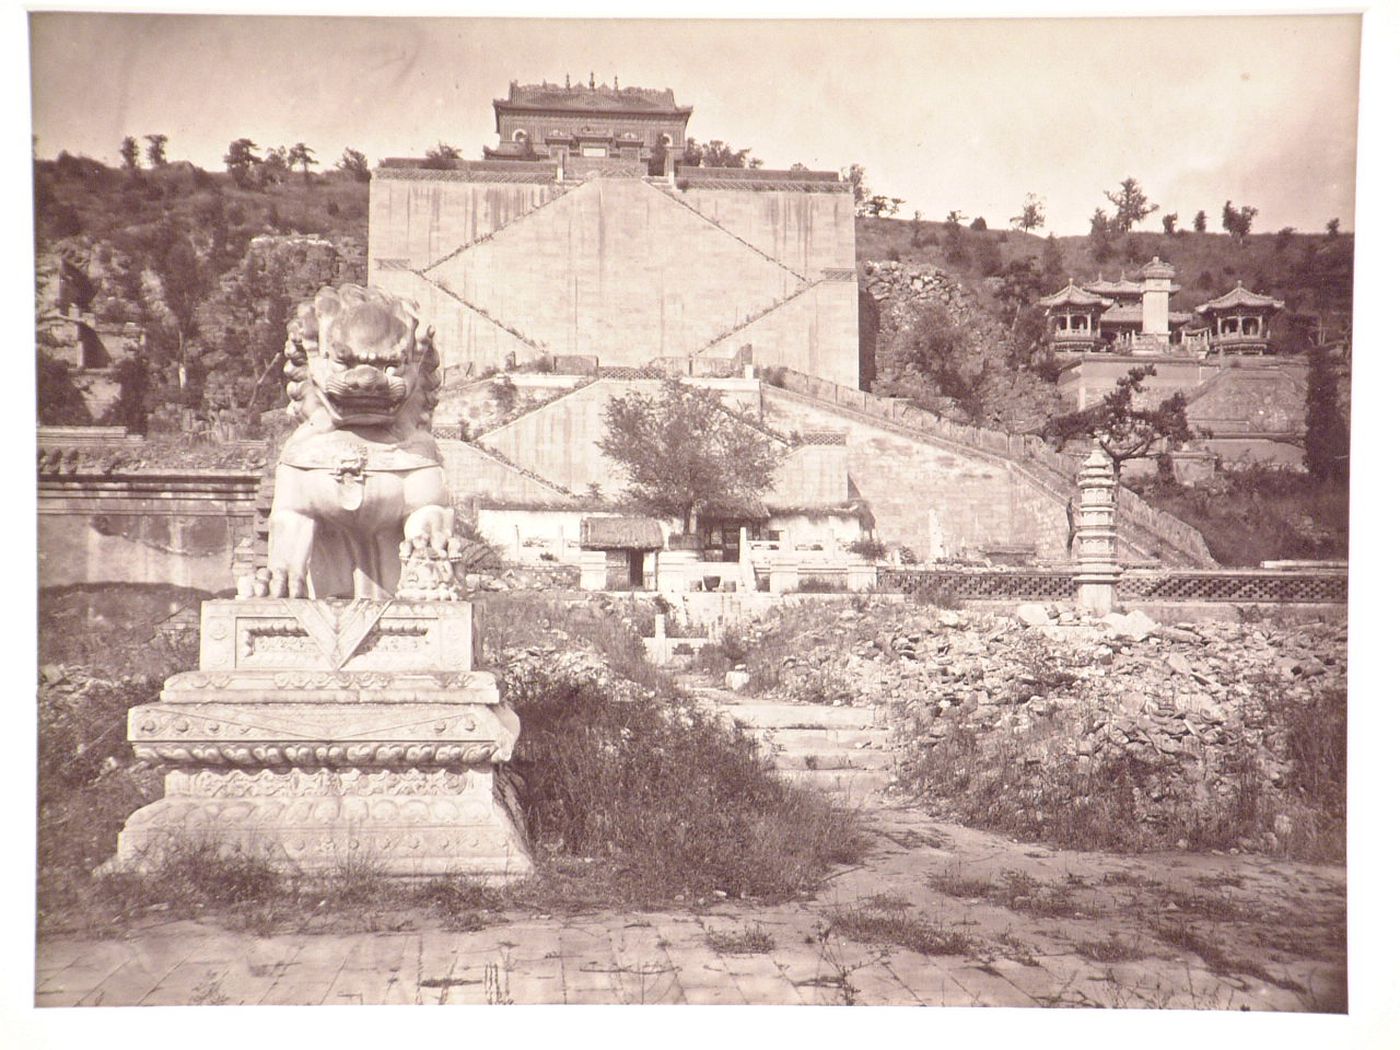 View of the Temple of the Sea of Wisdom [Zhihui Hai] and the Revolving Archive [Zhuanlun Cang], with a statue of a lion in the left foreground, Garden of the Clear Ripples [Qing Yi Yuan] (now the Summer Palace or Yihe Yuan), Peking (now Beijing), China